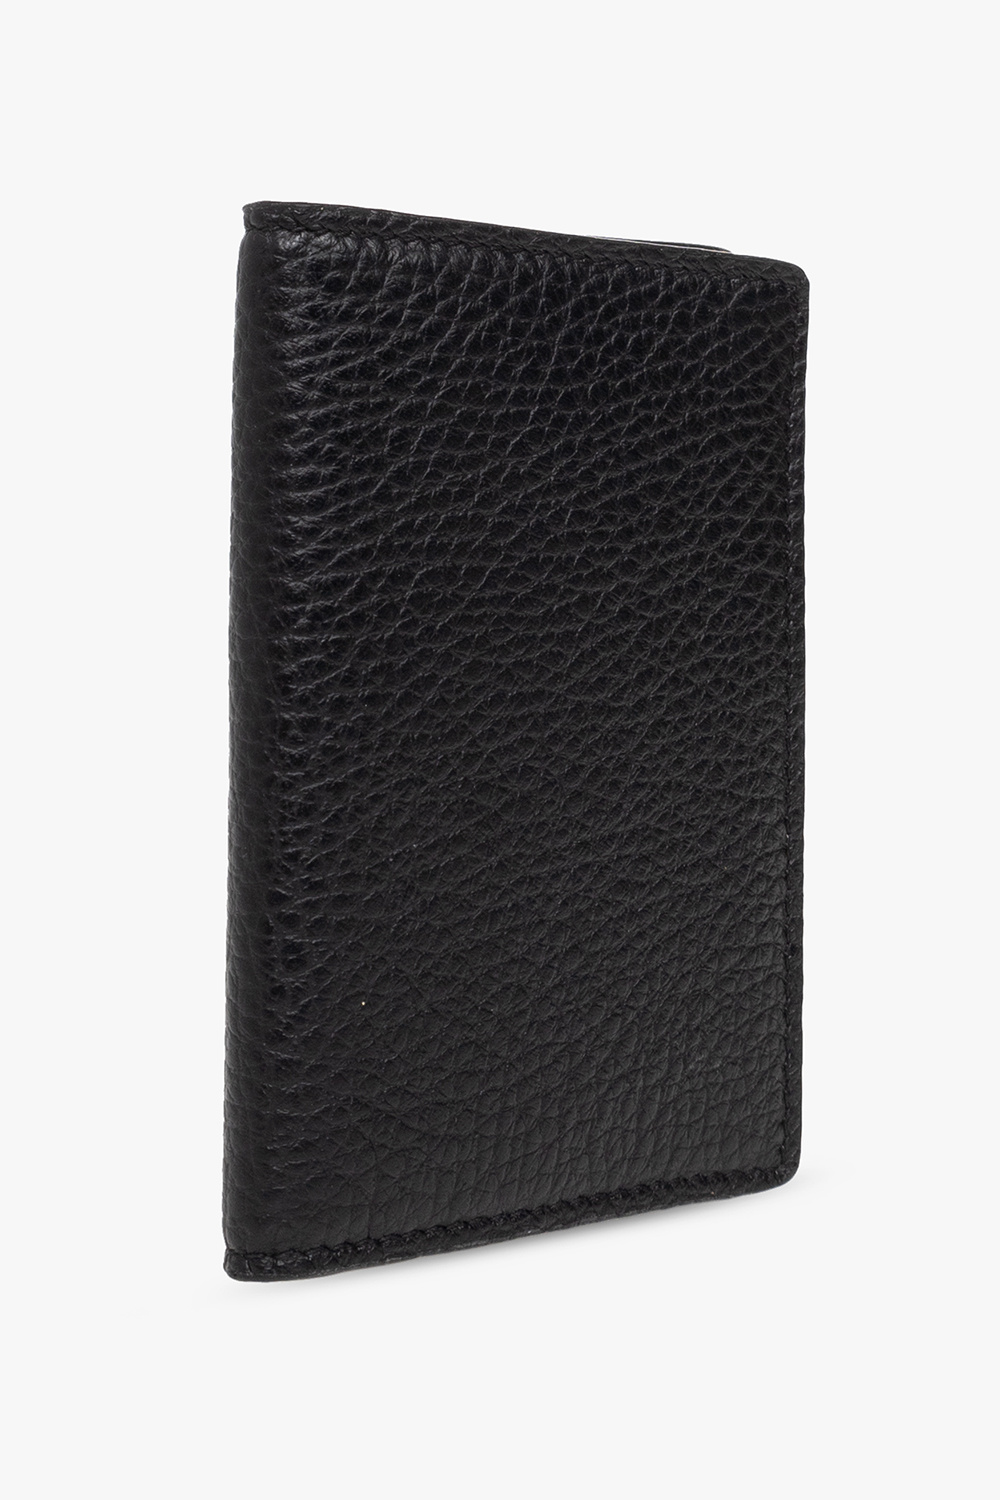 Common Projects Bifold card holder